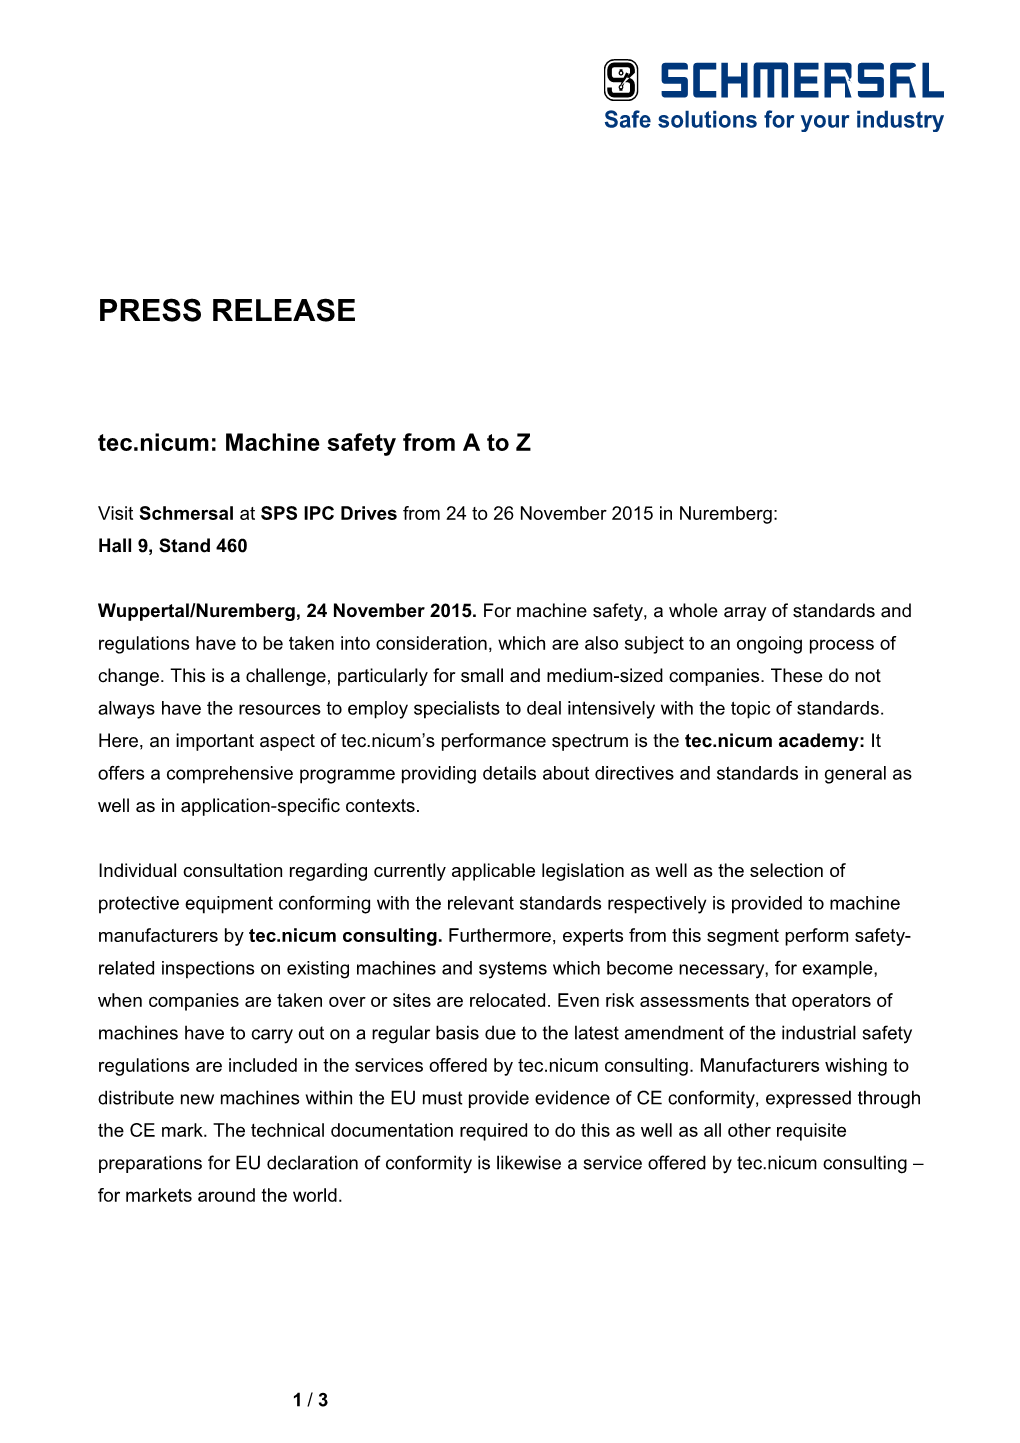 Tec.Nicum: Machine Safety from a to Z